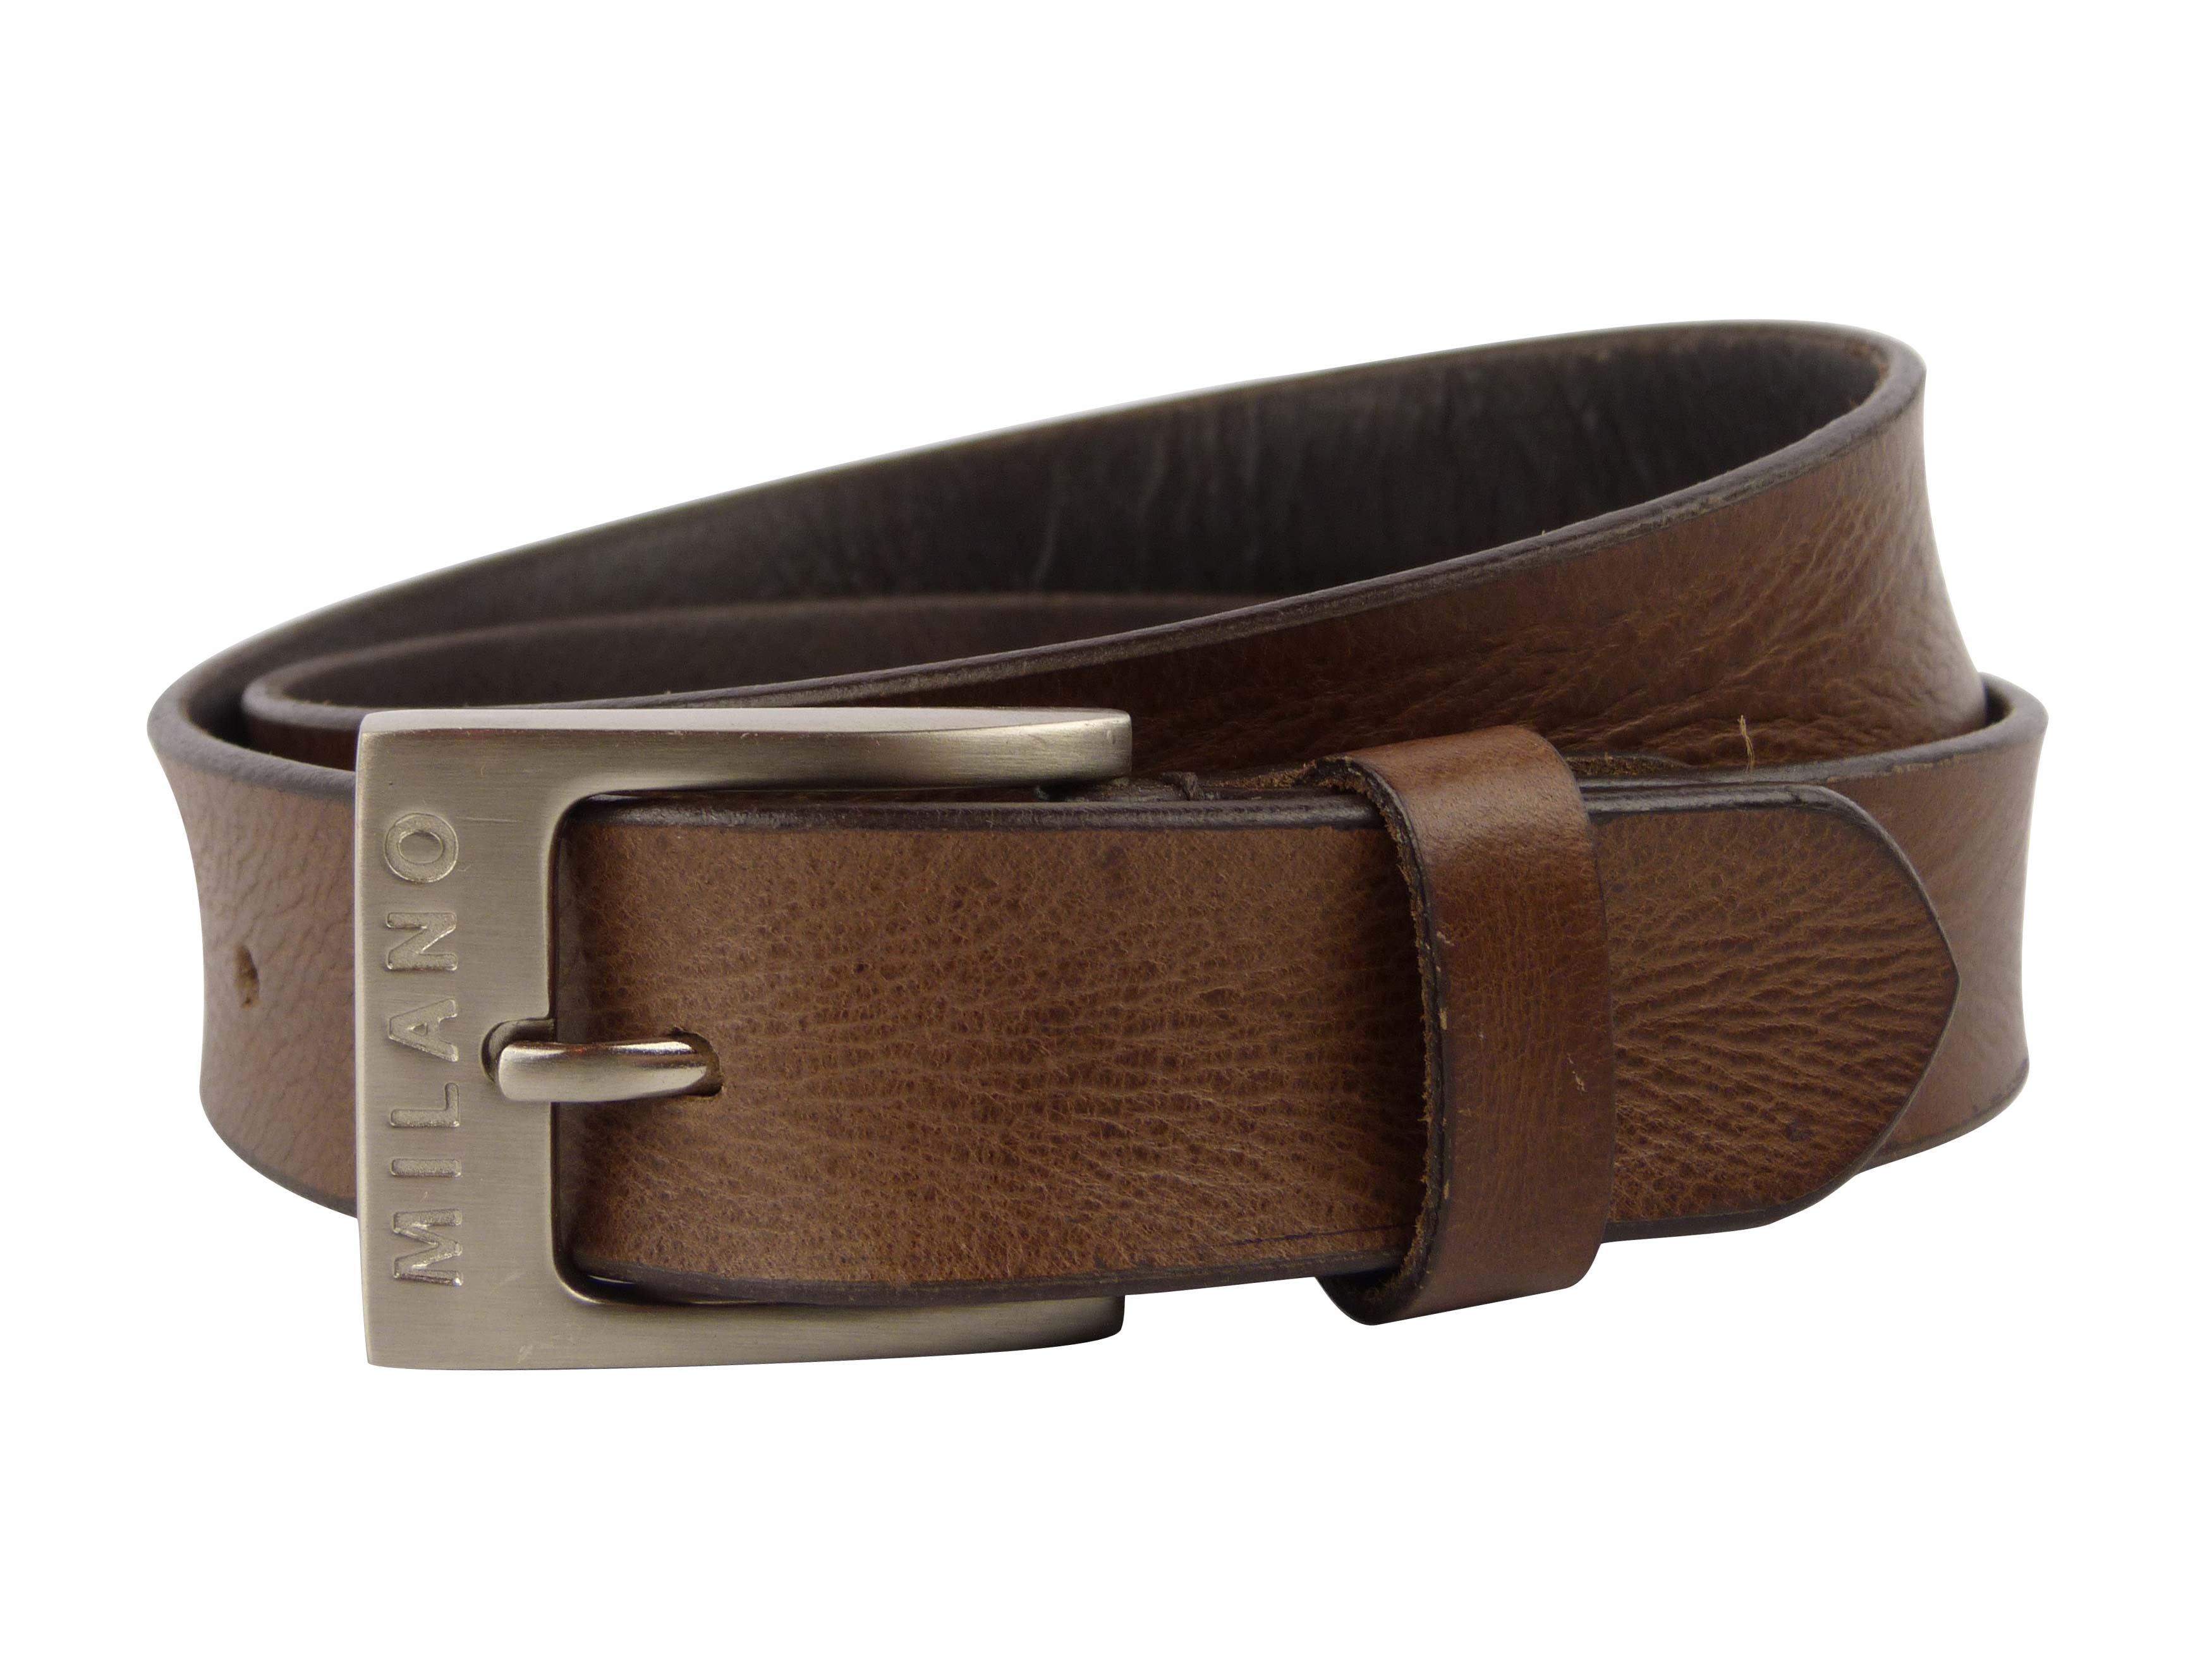 Mens Real Leather Belt 1.25" Wide All Sizes by Milano up to 48 (Brown) - Picture 1 of 1